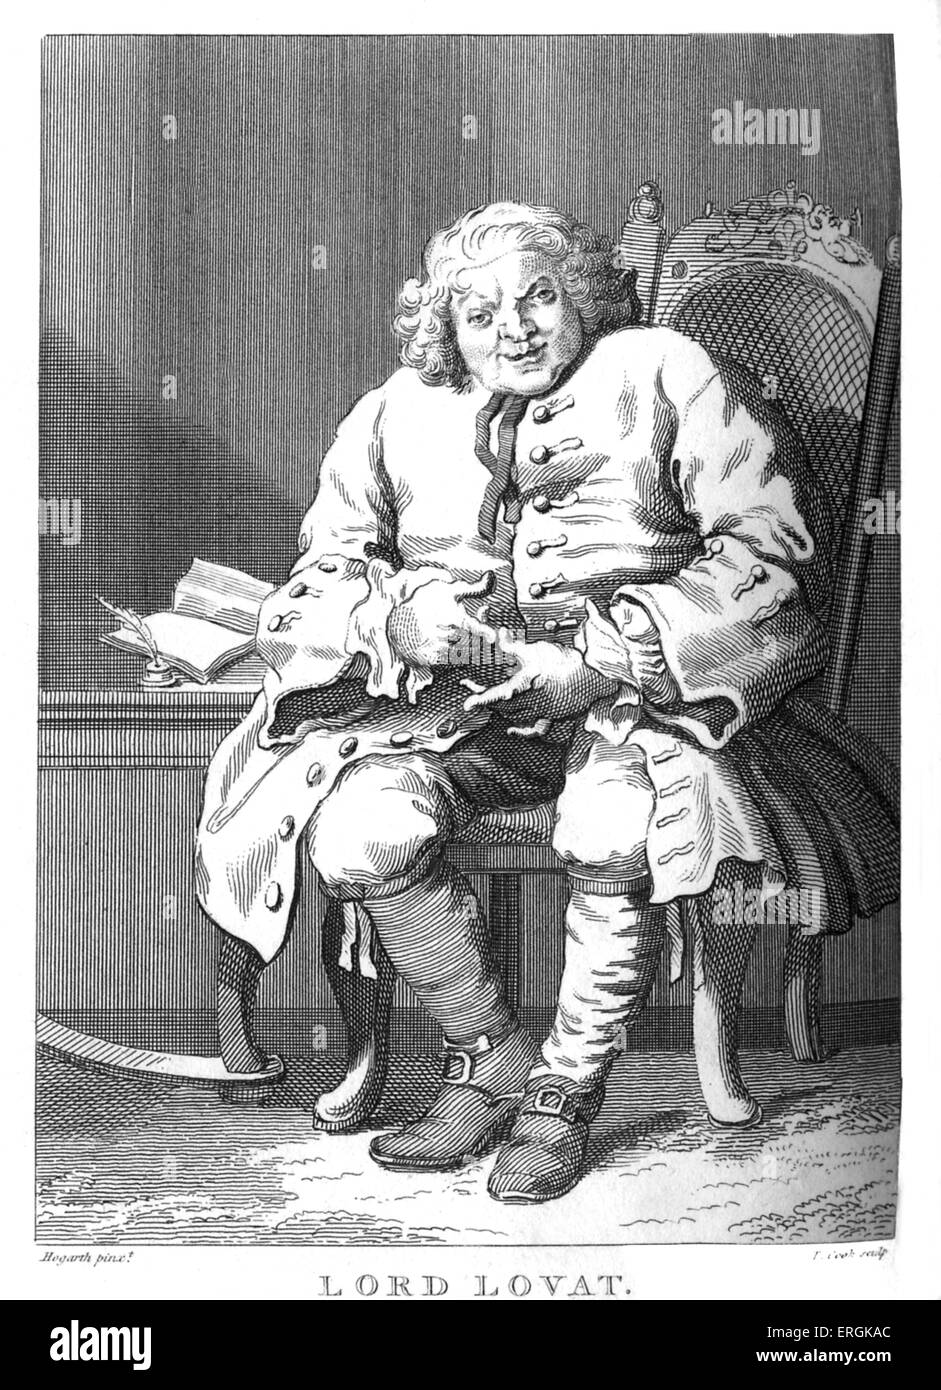 Lord Lovat by William Hogarth, 1745. Simon Lord Lovat (1667-1747) participated in the Jacobite revolt, and was the last prisoner beheaded in the Tower of London. Engraved by Thomas Cook Stock Photo